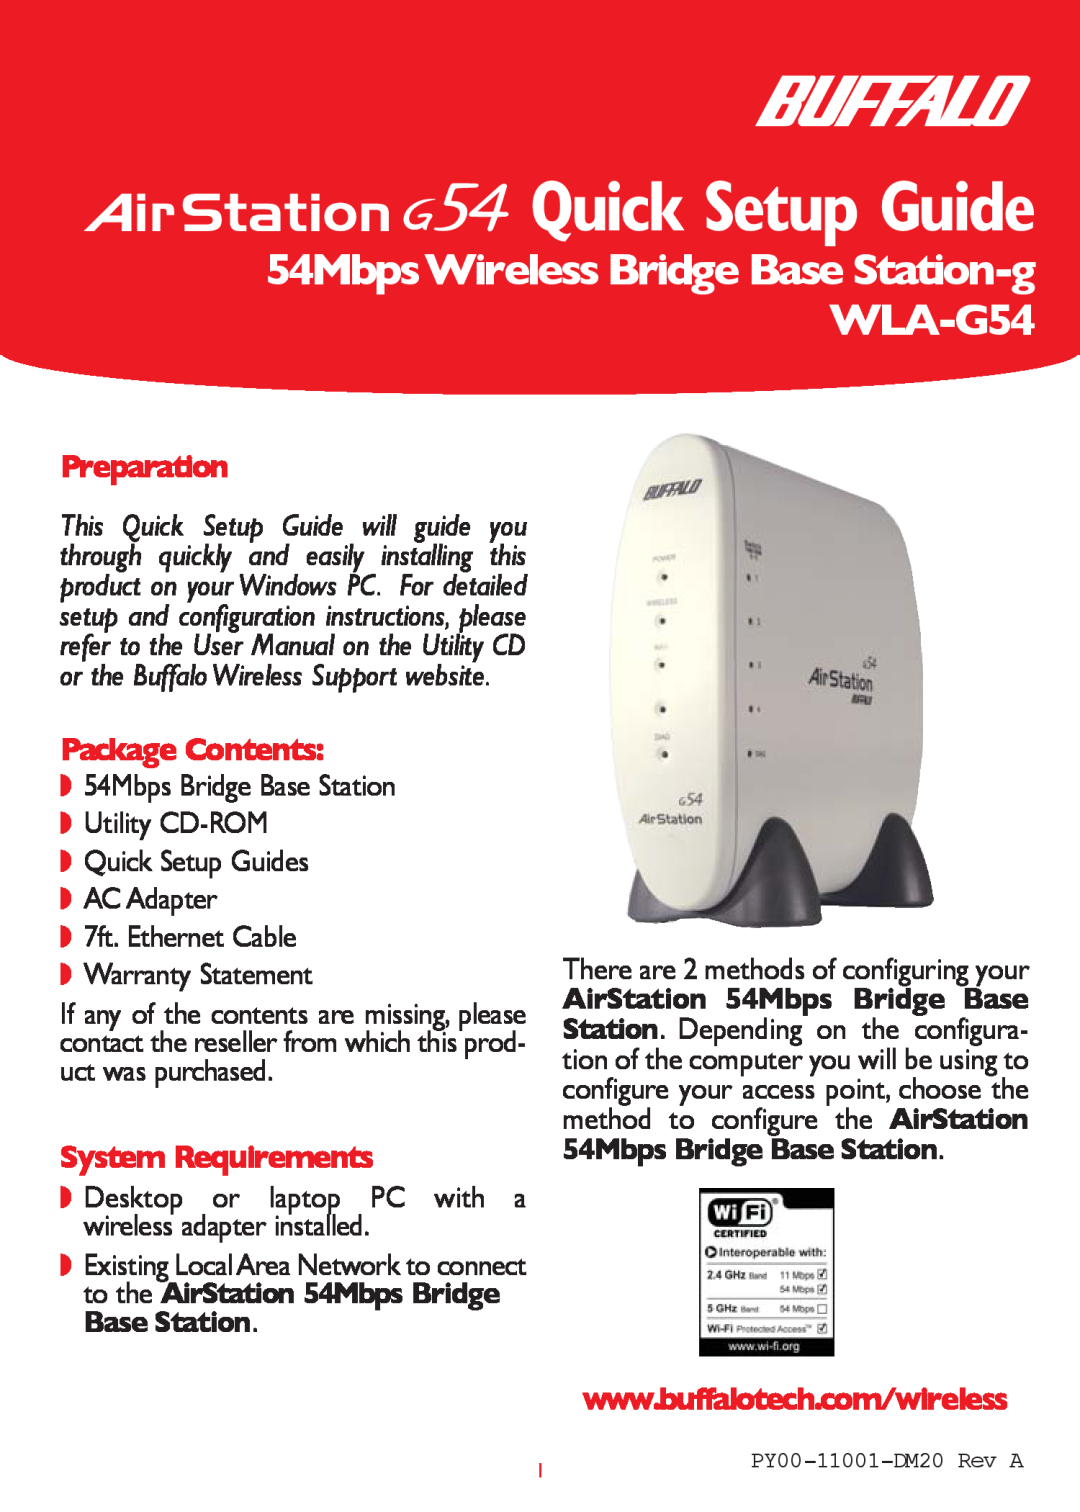 Buffalo Technology WLA-G54 setup guide Preparation, Package Contents, System Requirements, Quick Setup Guide 